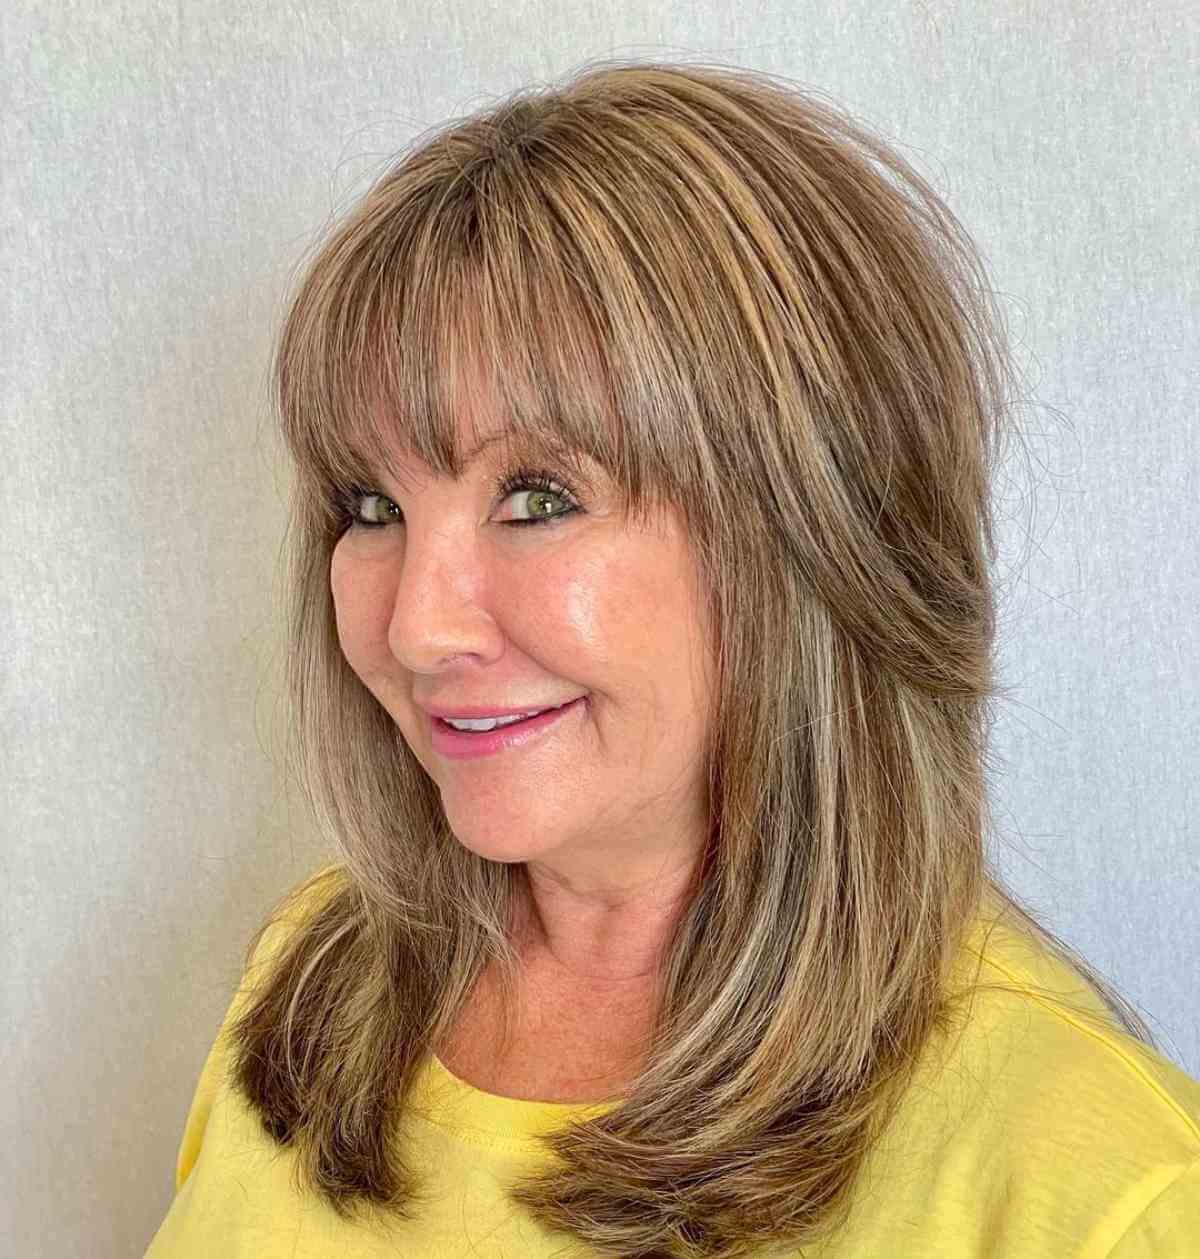 Messy Shag for Women Over 50 with Thin Fine Hair